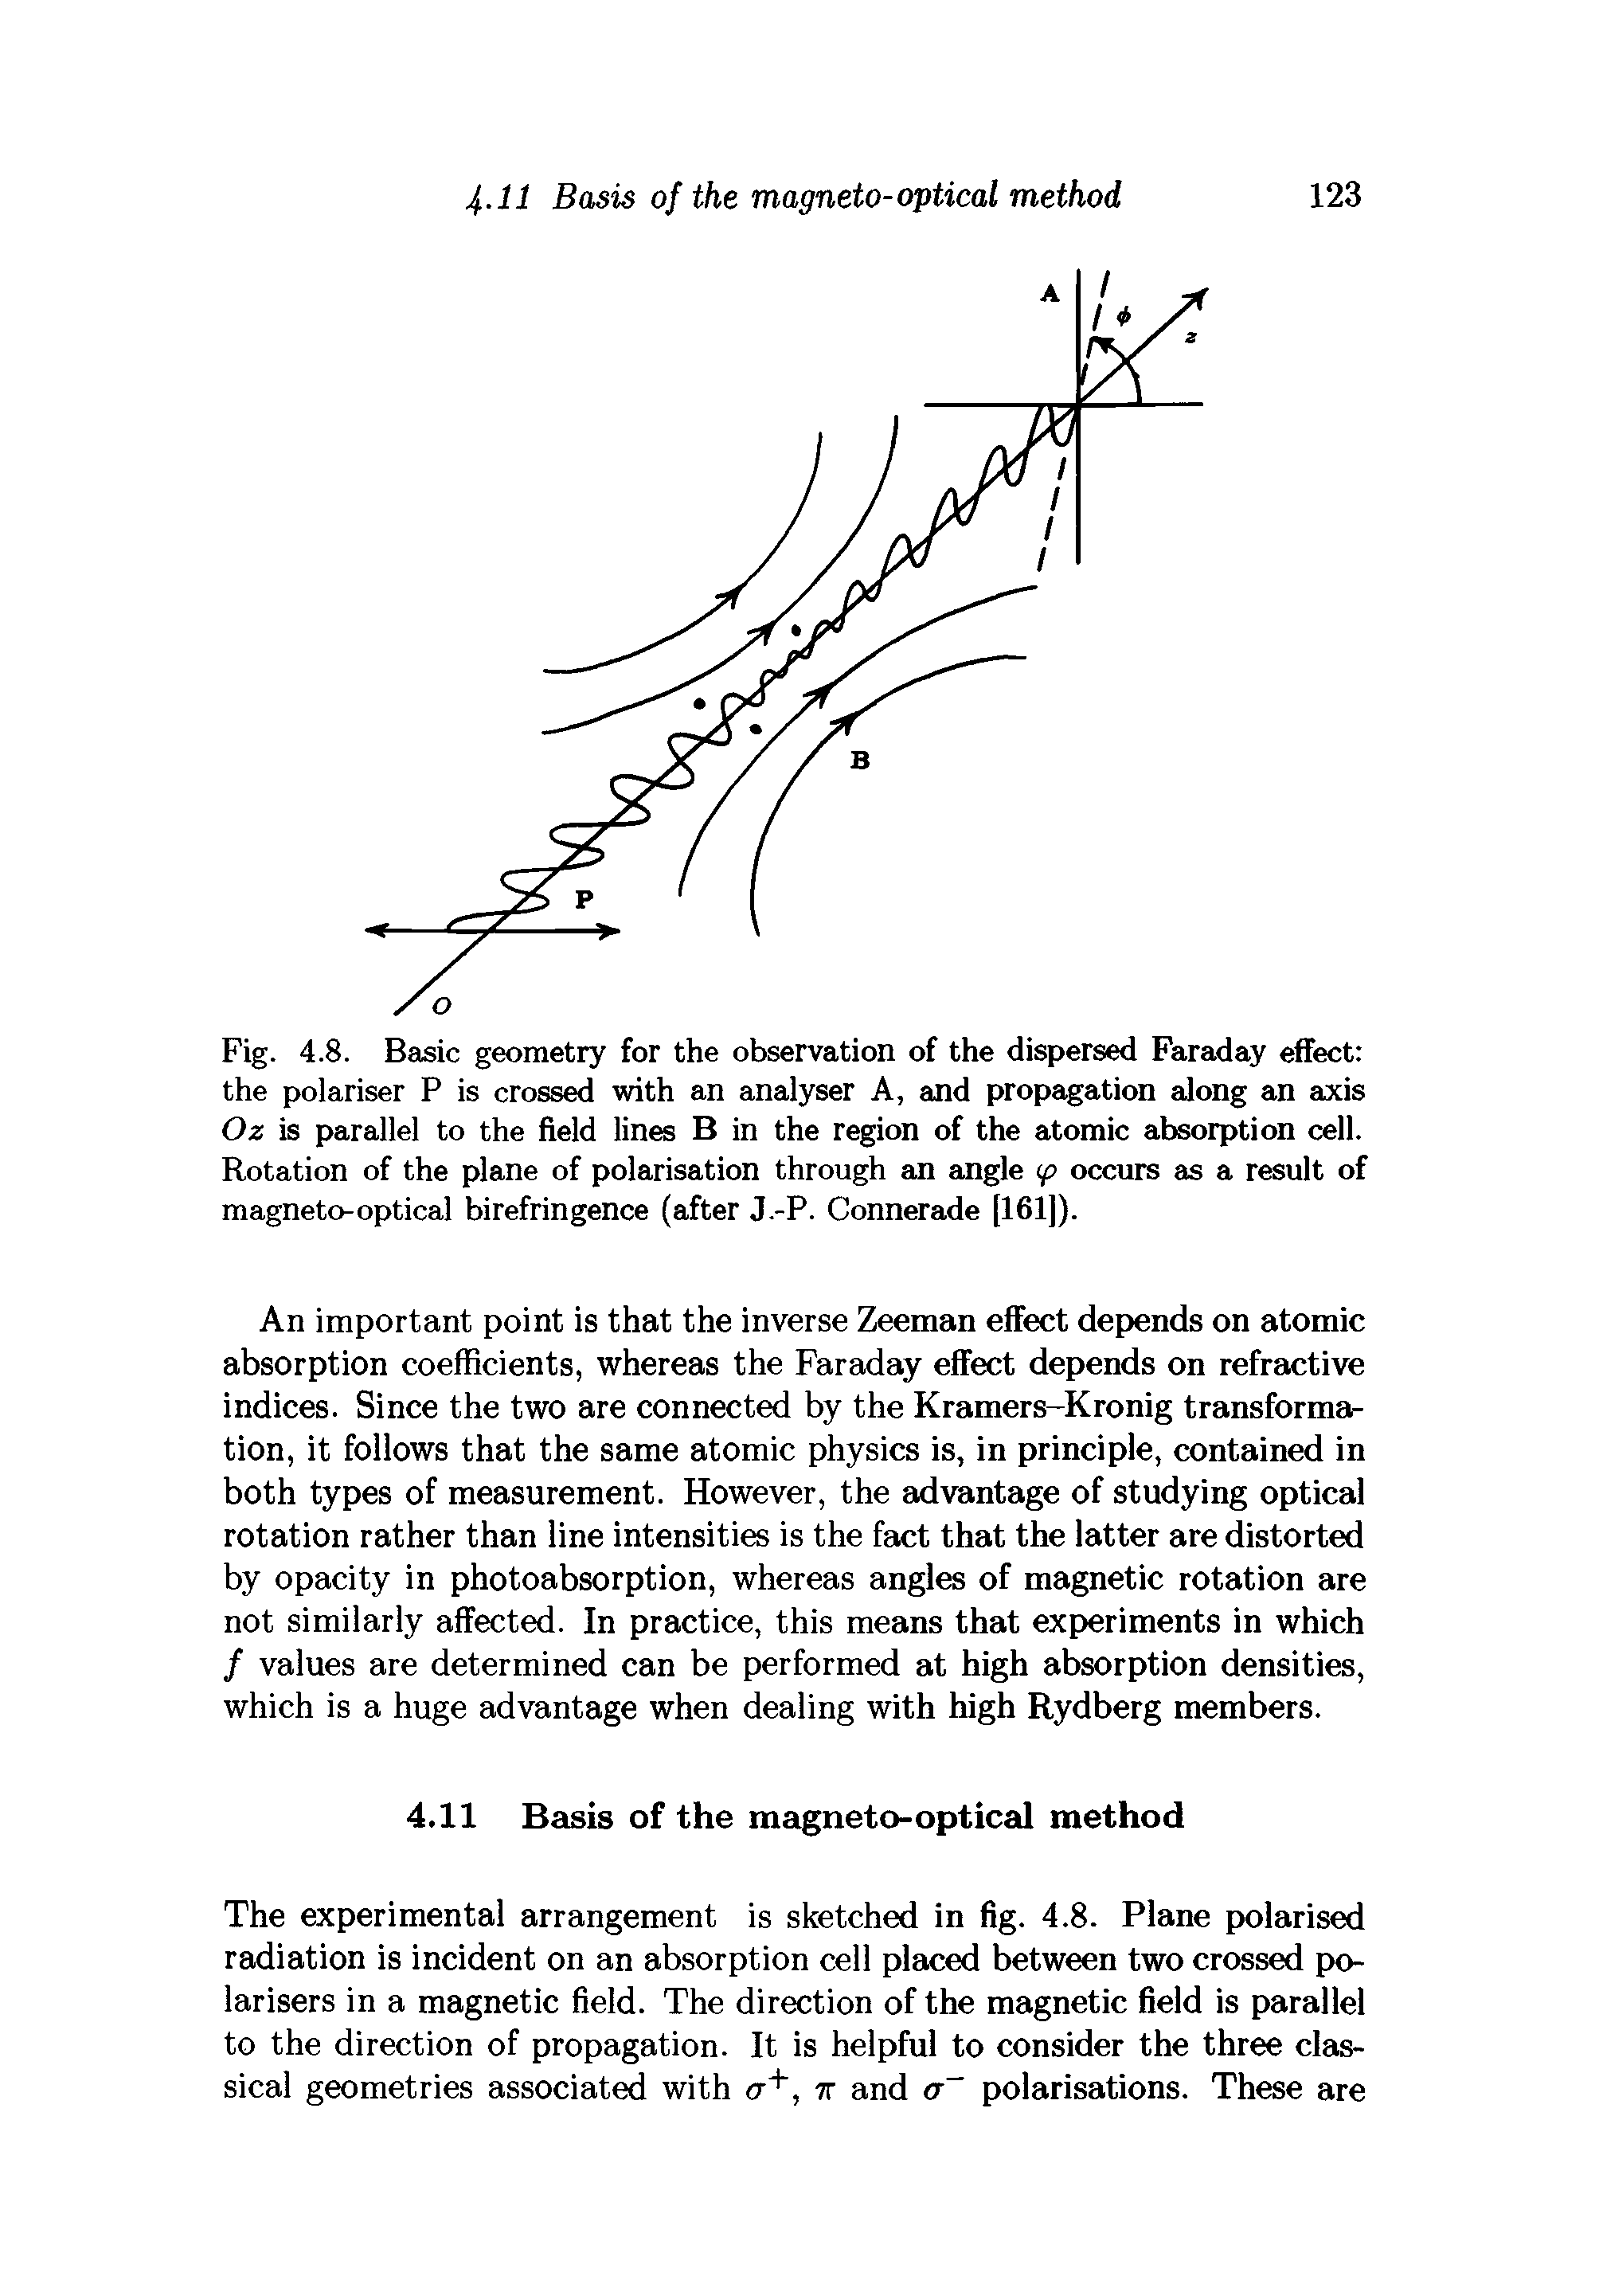 Fig. 4.8. Basic geometry for the observation of the dispersed Faraday effect the polariser P is crossed with an analyser A, and propagation along an axis Oz is parallel to the field lines B in the region of the atomic absorption cell. Rotation of the plane of polarisation through an angle (p occurs as a result of magneto-optical birefringence (after J.-P. Connerade [161]).